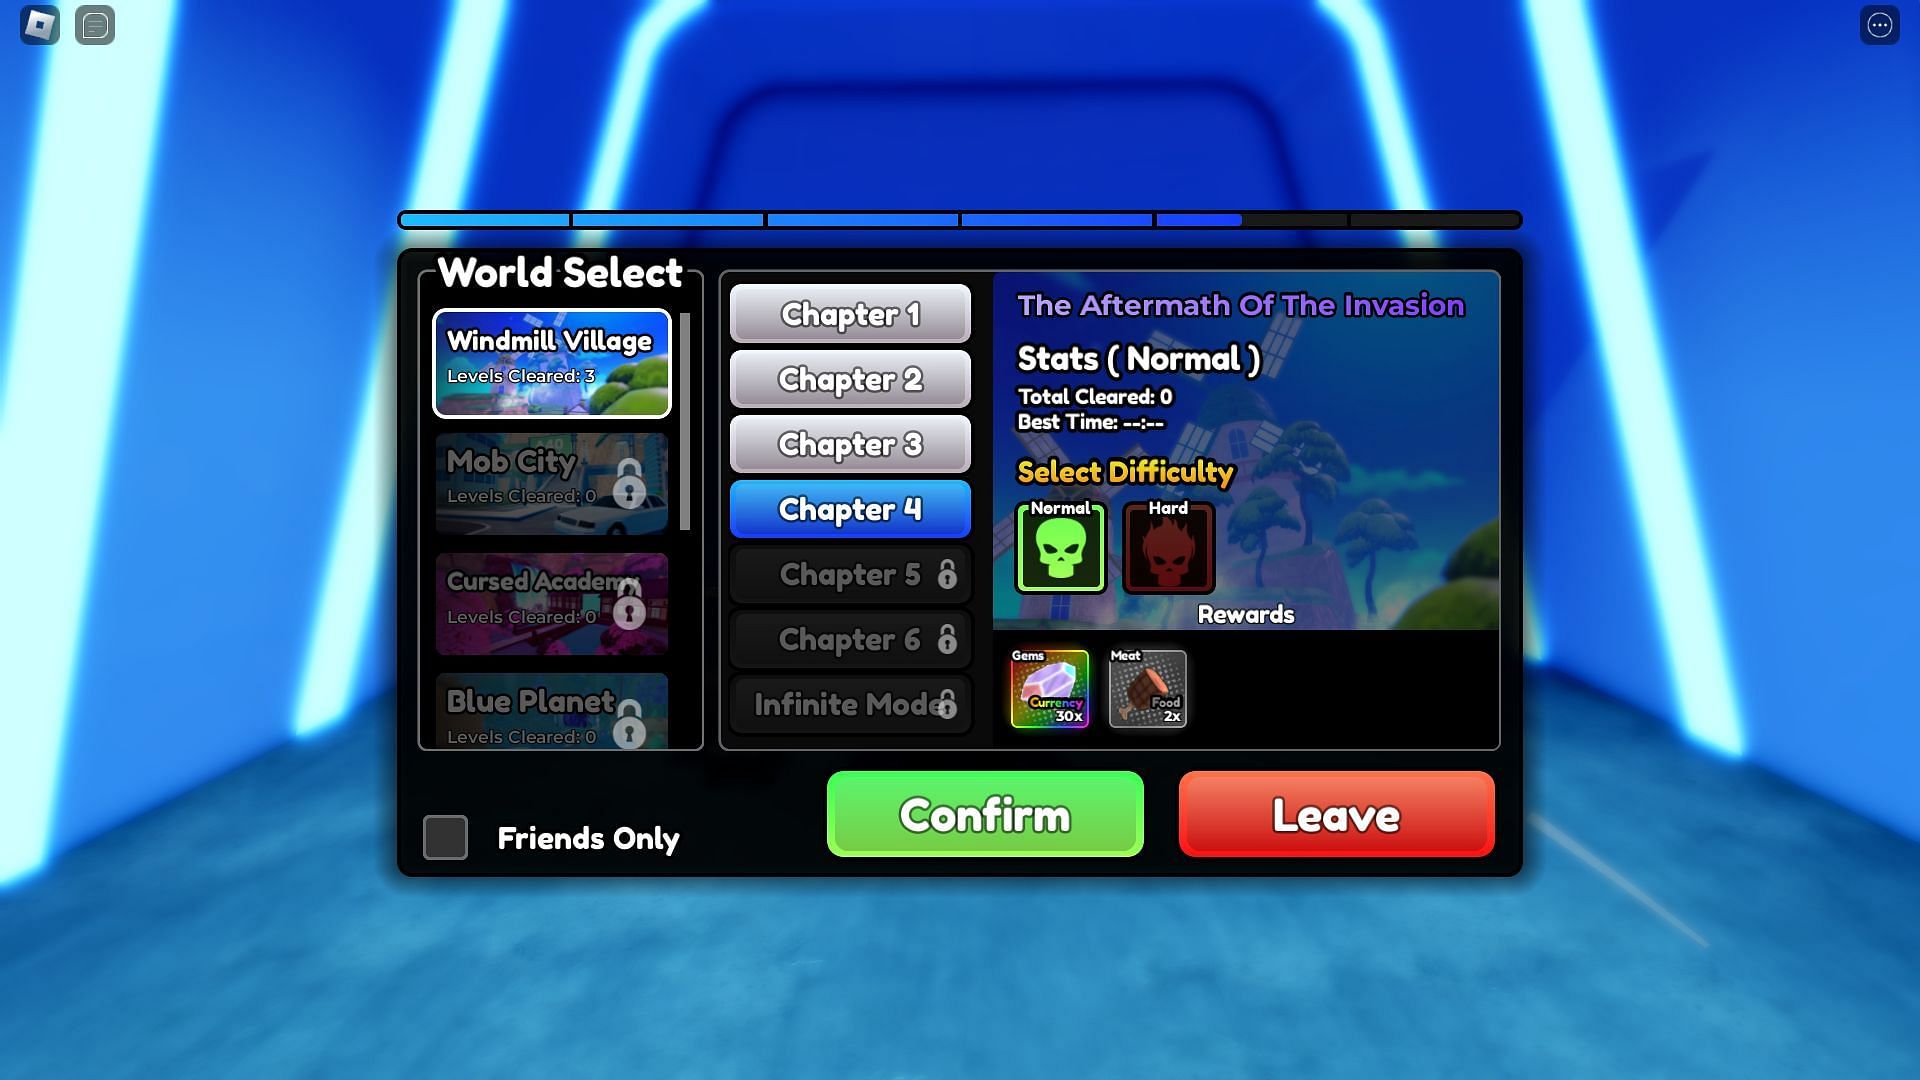 You can unlock Slime Spirit by clearing the Story Mode and being in the top 1-100 (Image via Roblox)